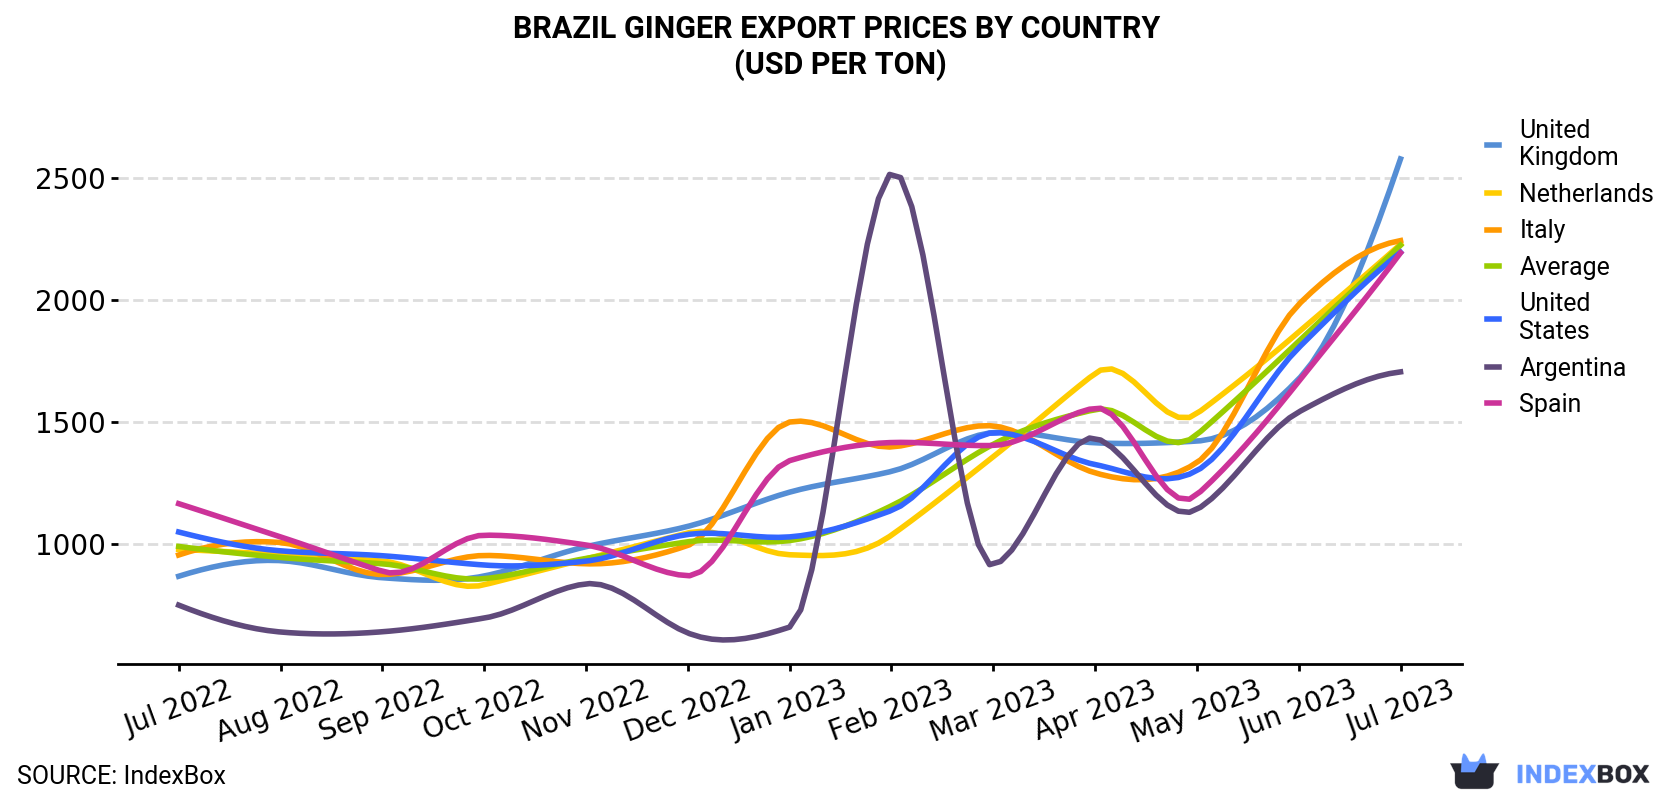 Brazil Ginger Export Prices By Country (USD Per Ton)